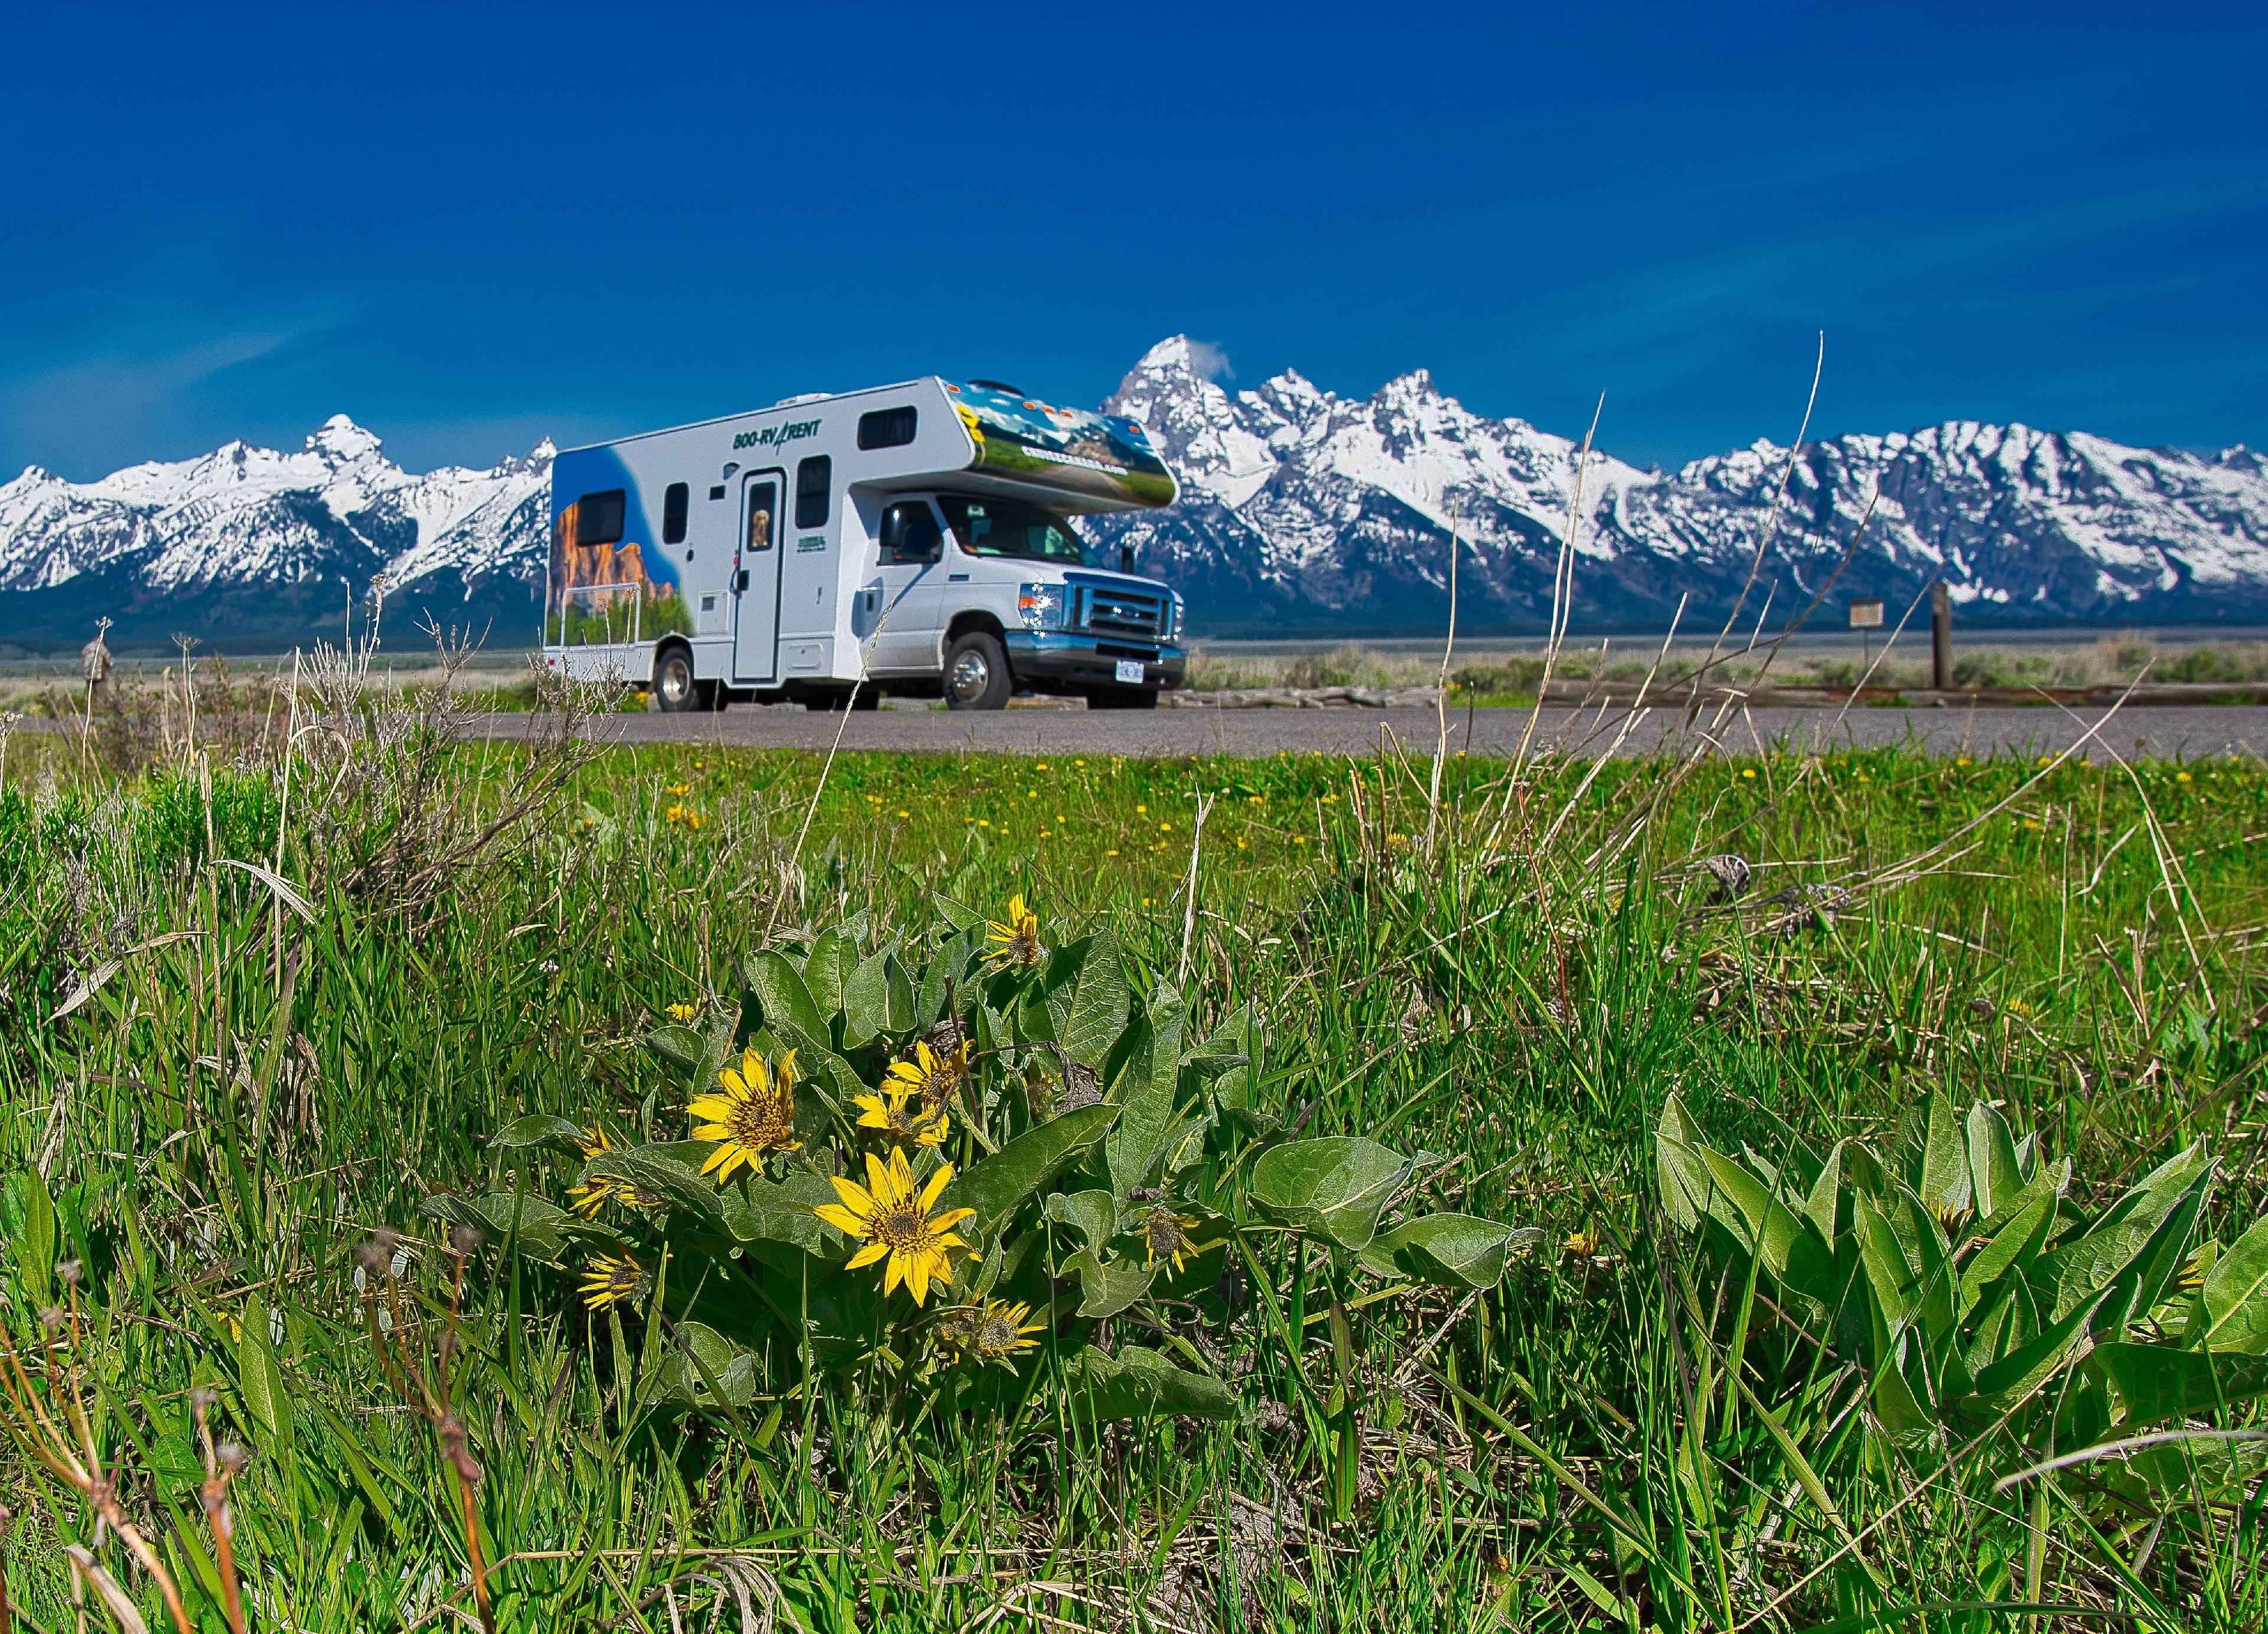 Iconic places and national parks - USA in a motorhome – image 4